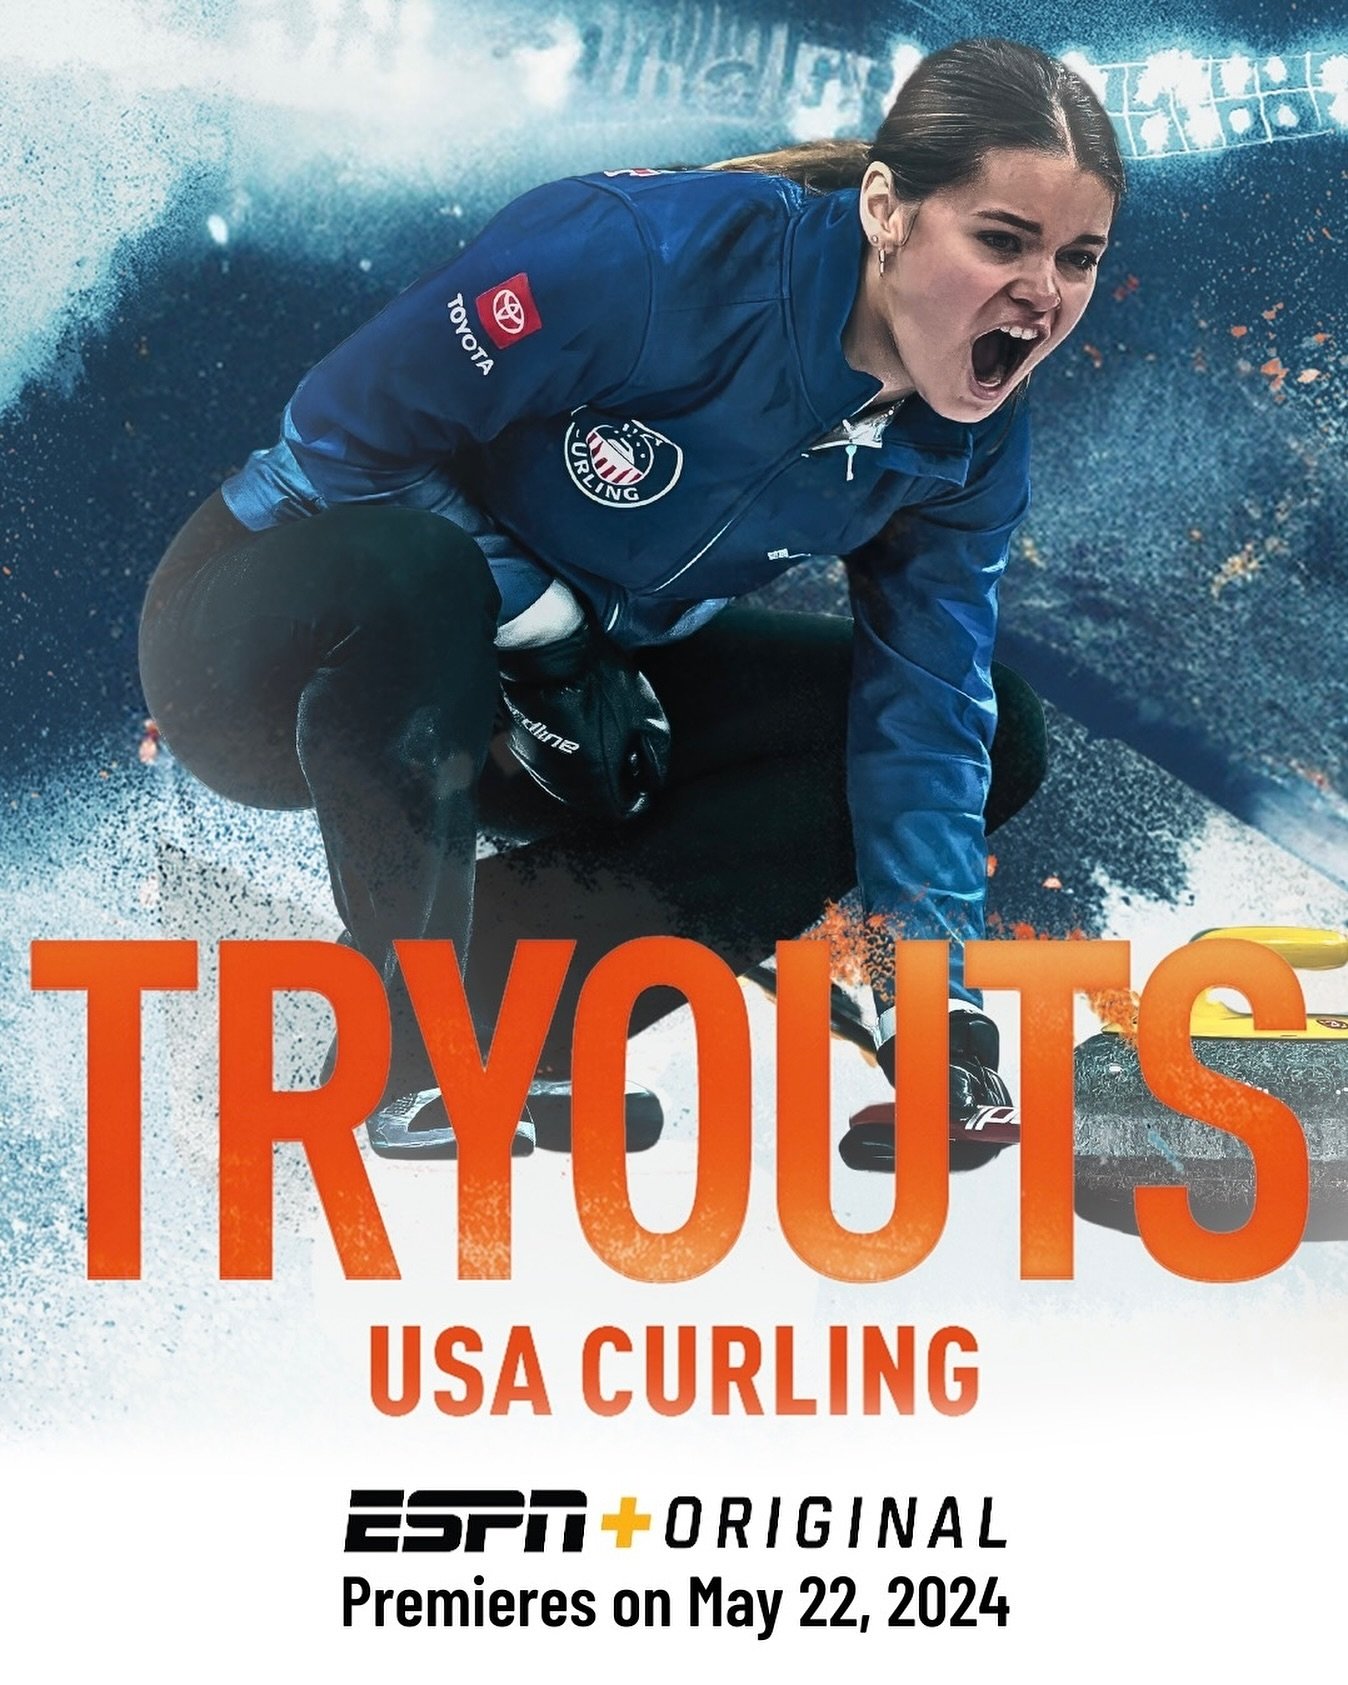 Check out the USA Curling episode of the ESPN+ Original series Tryouts, premiering Wednesday May 22nd on ESPN+.